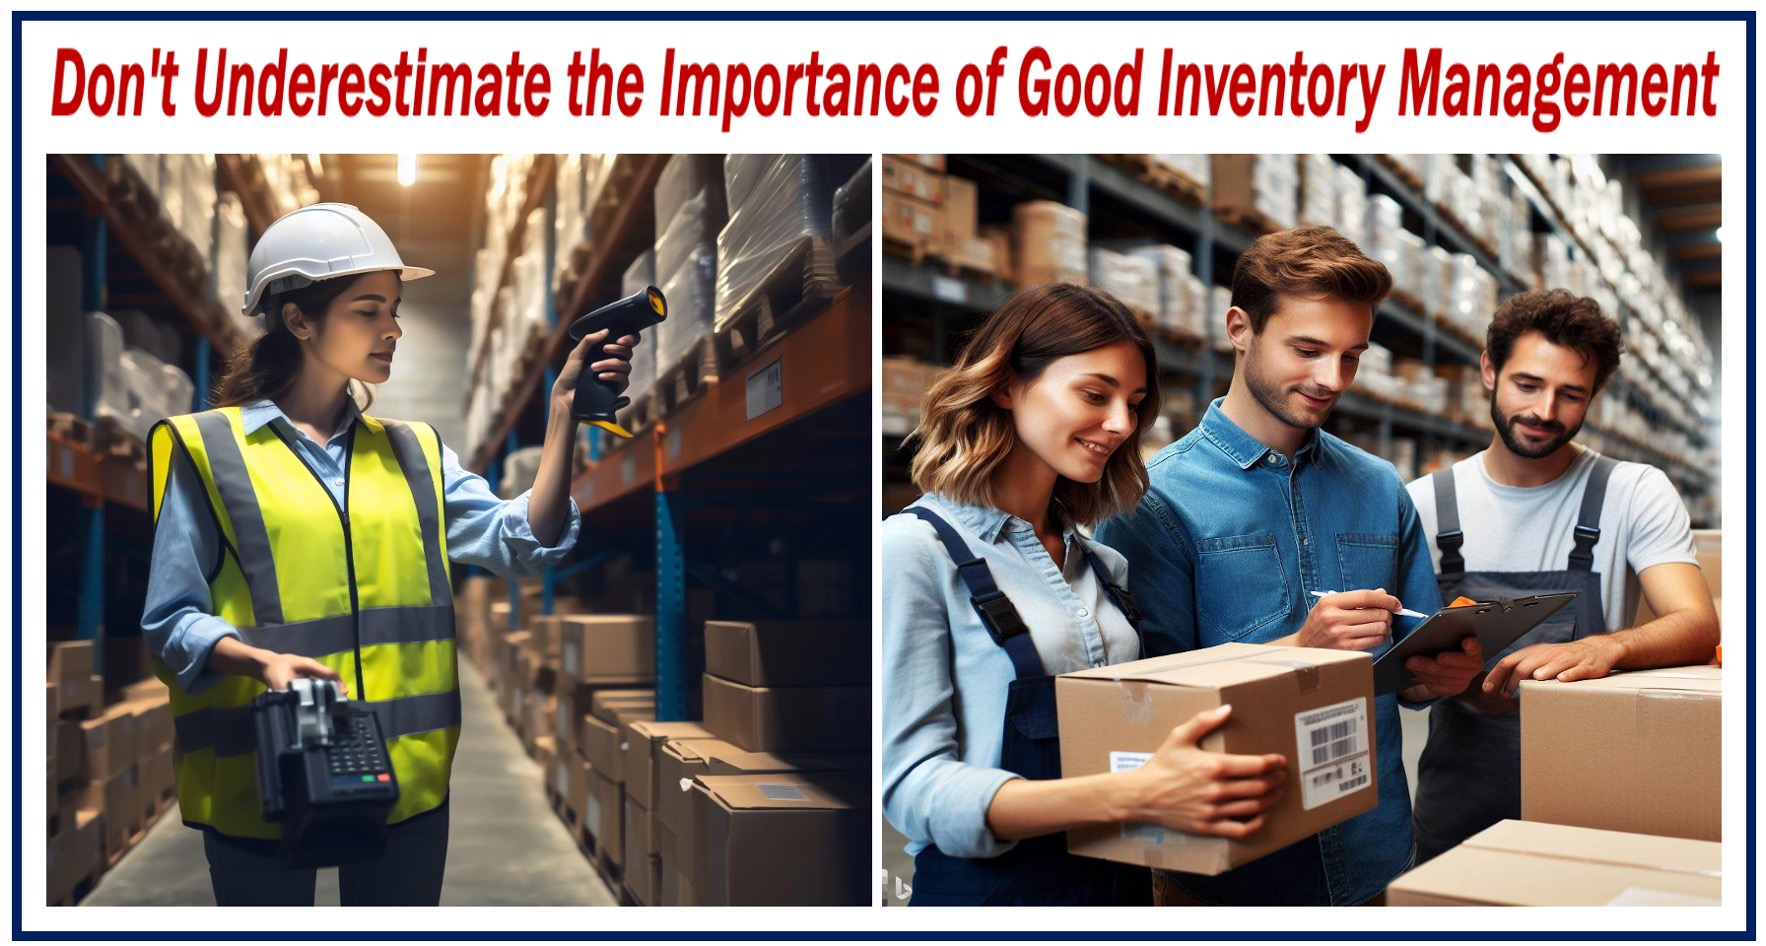 Two images showing employees checking inventory in a warehouse